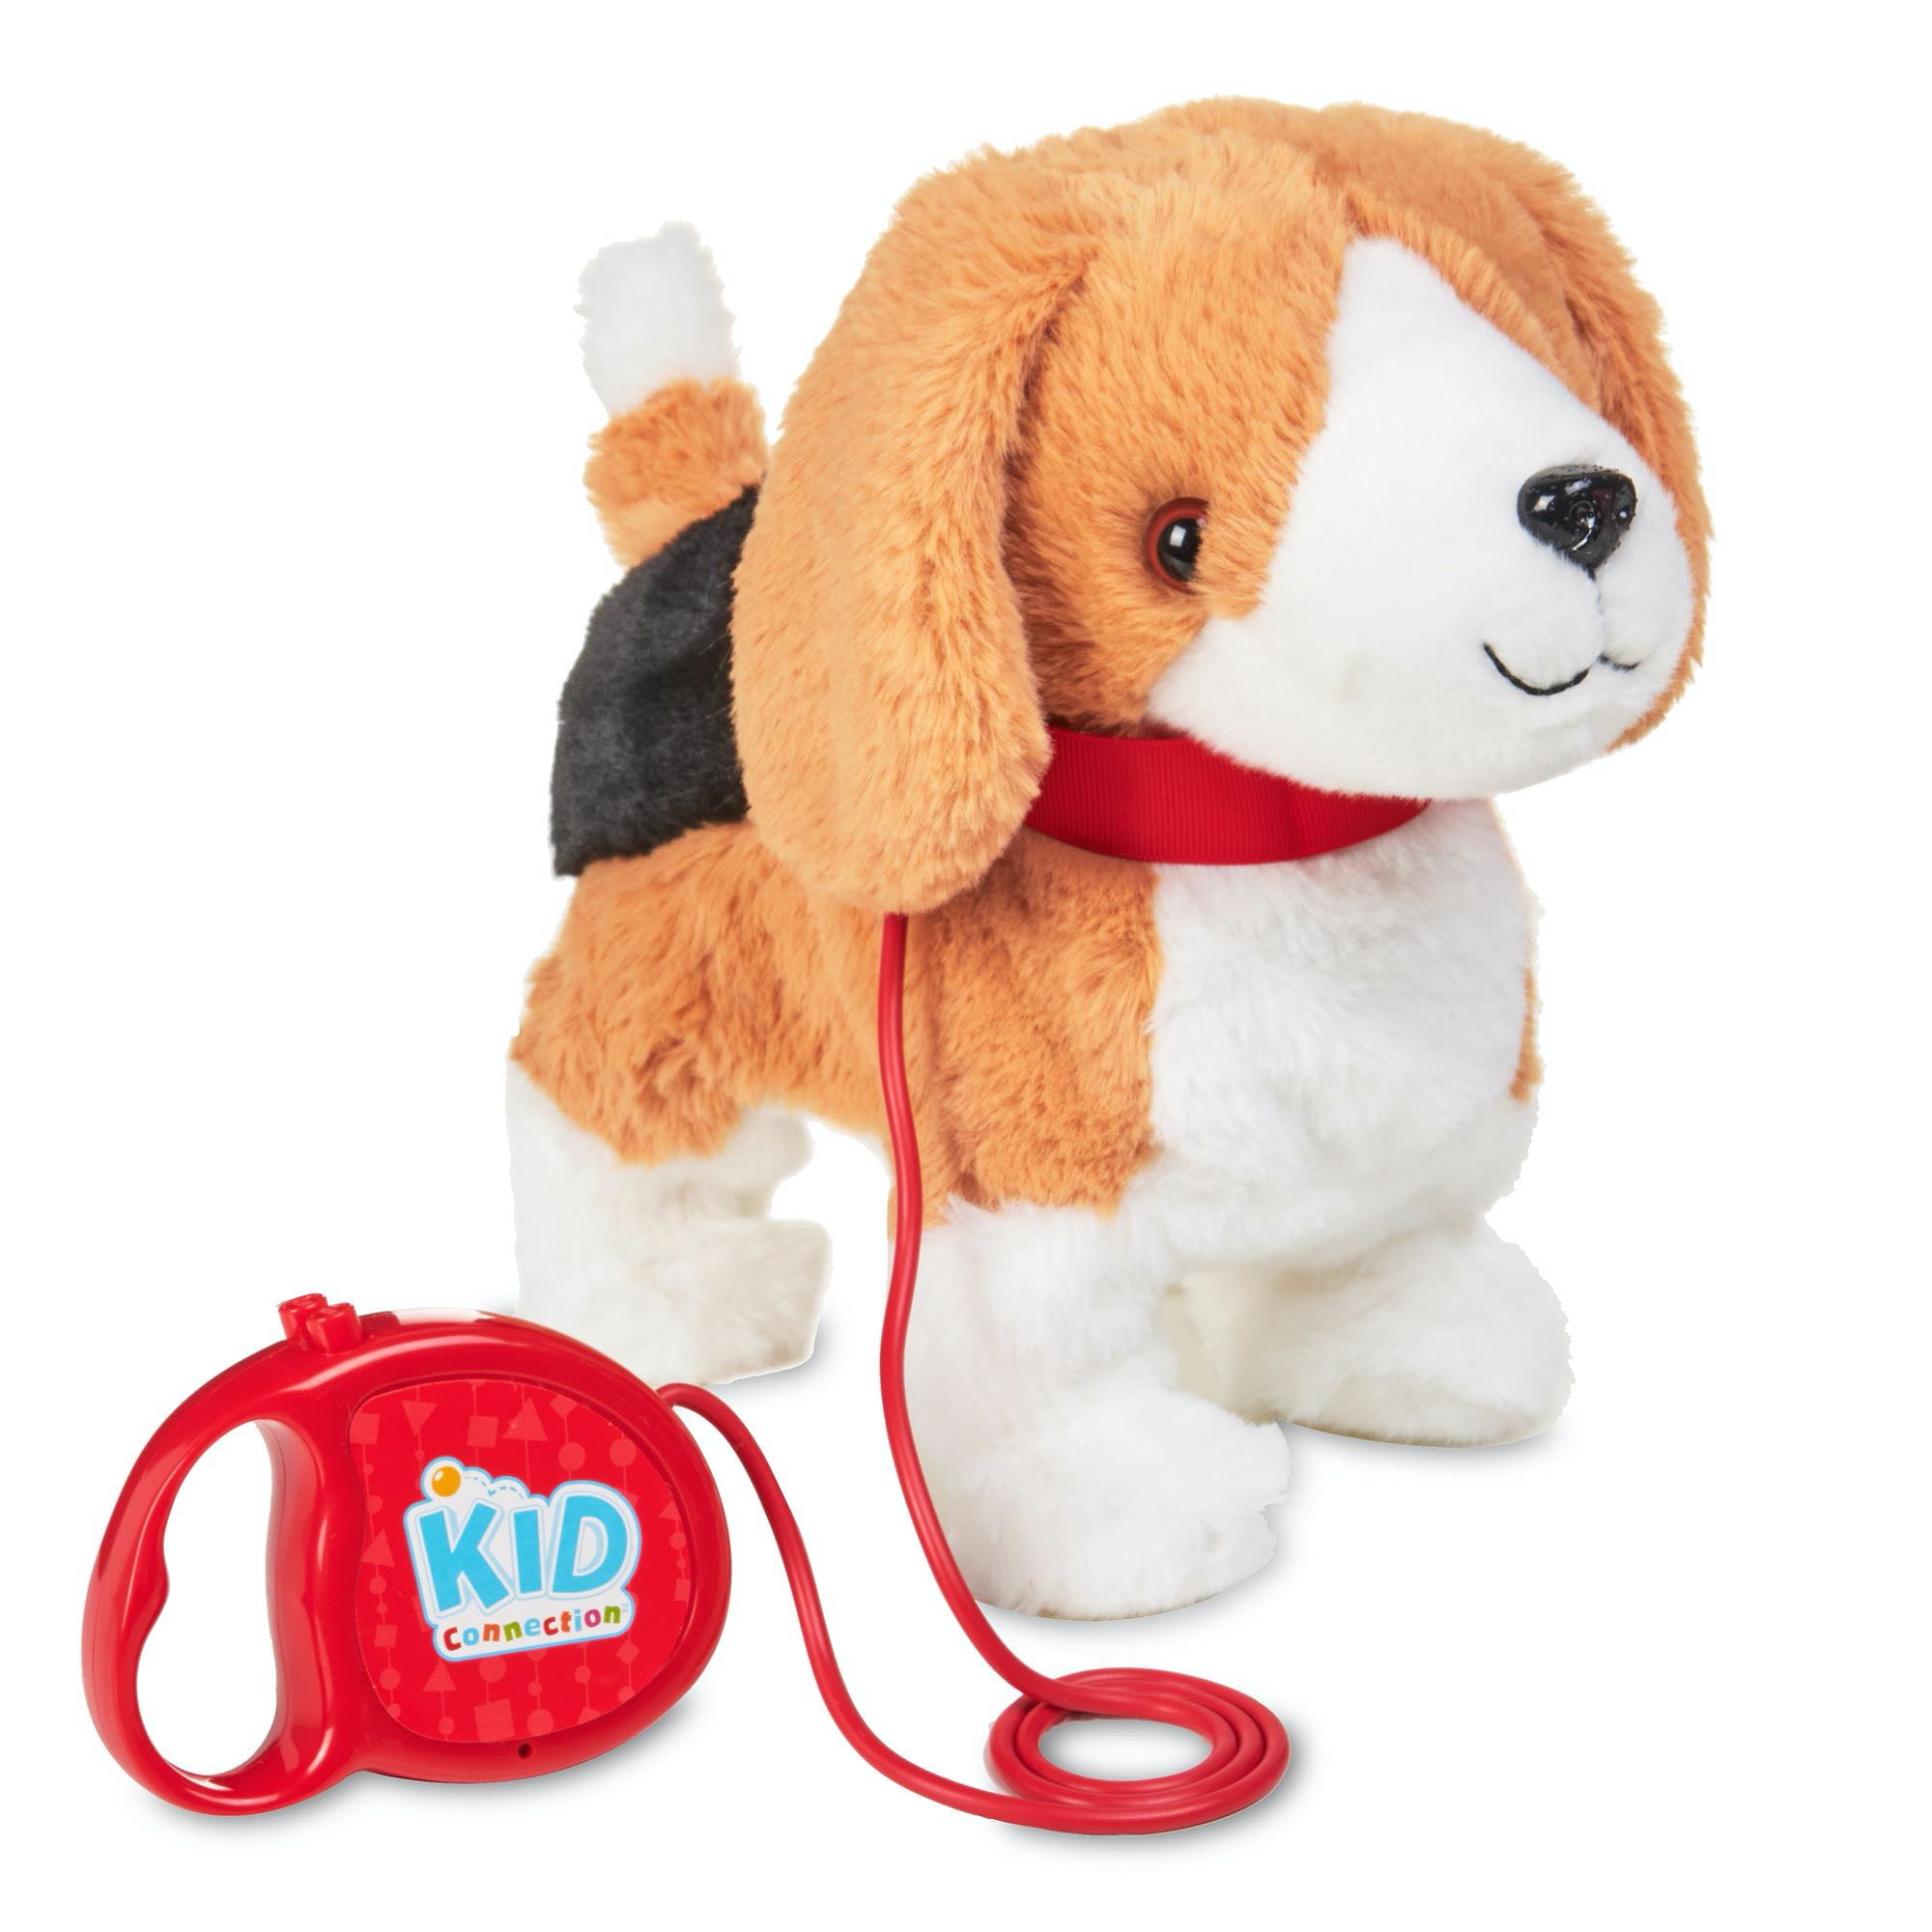 Kid Connection Electronic Walking Pet, Puppy